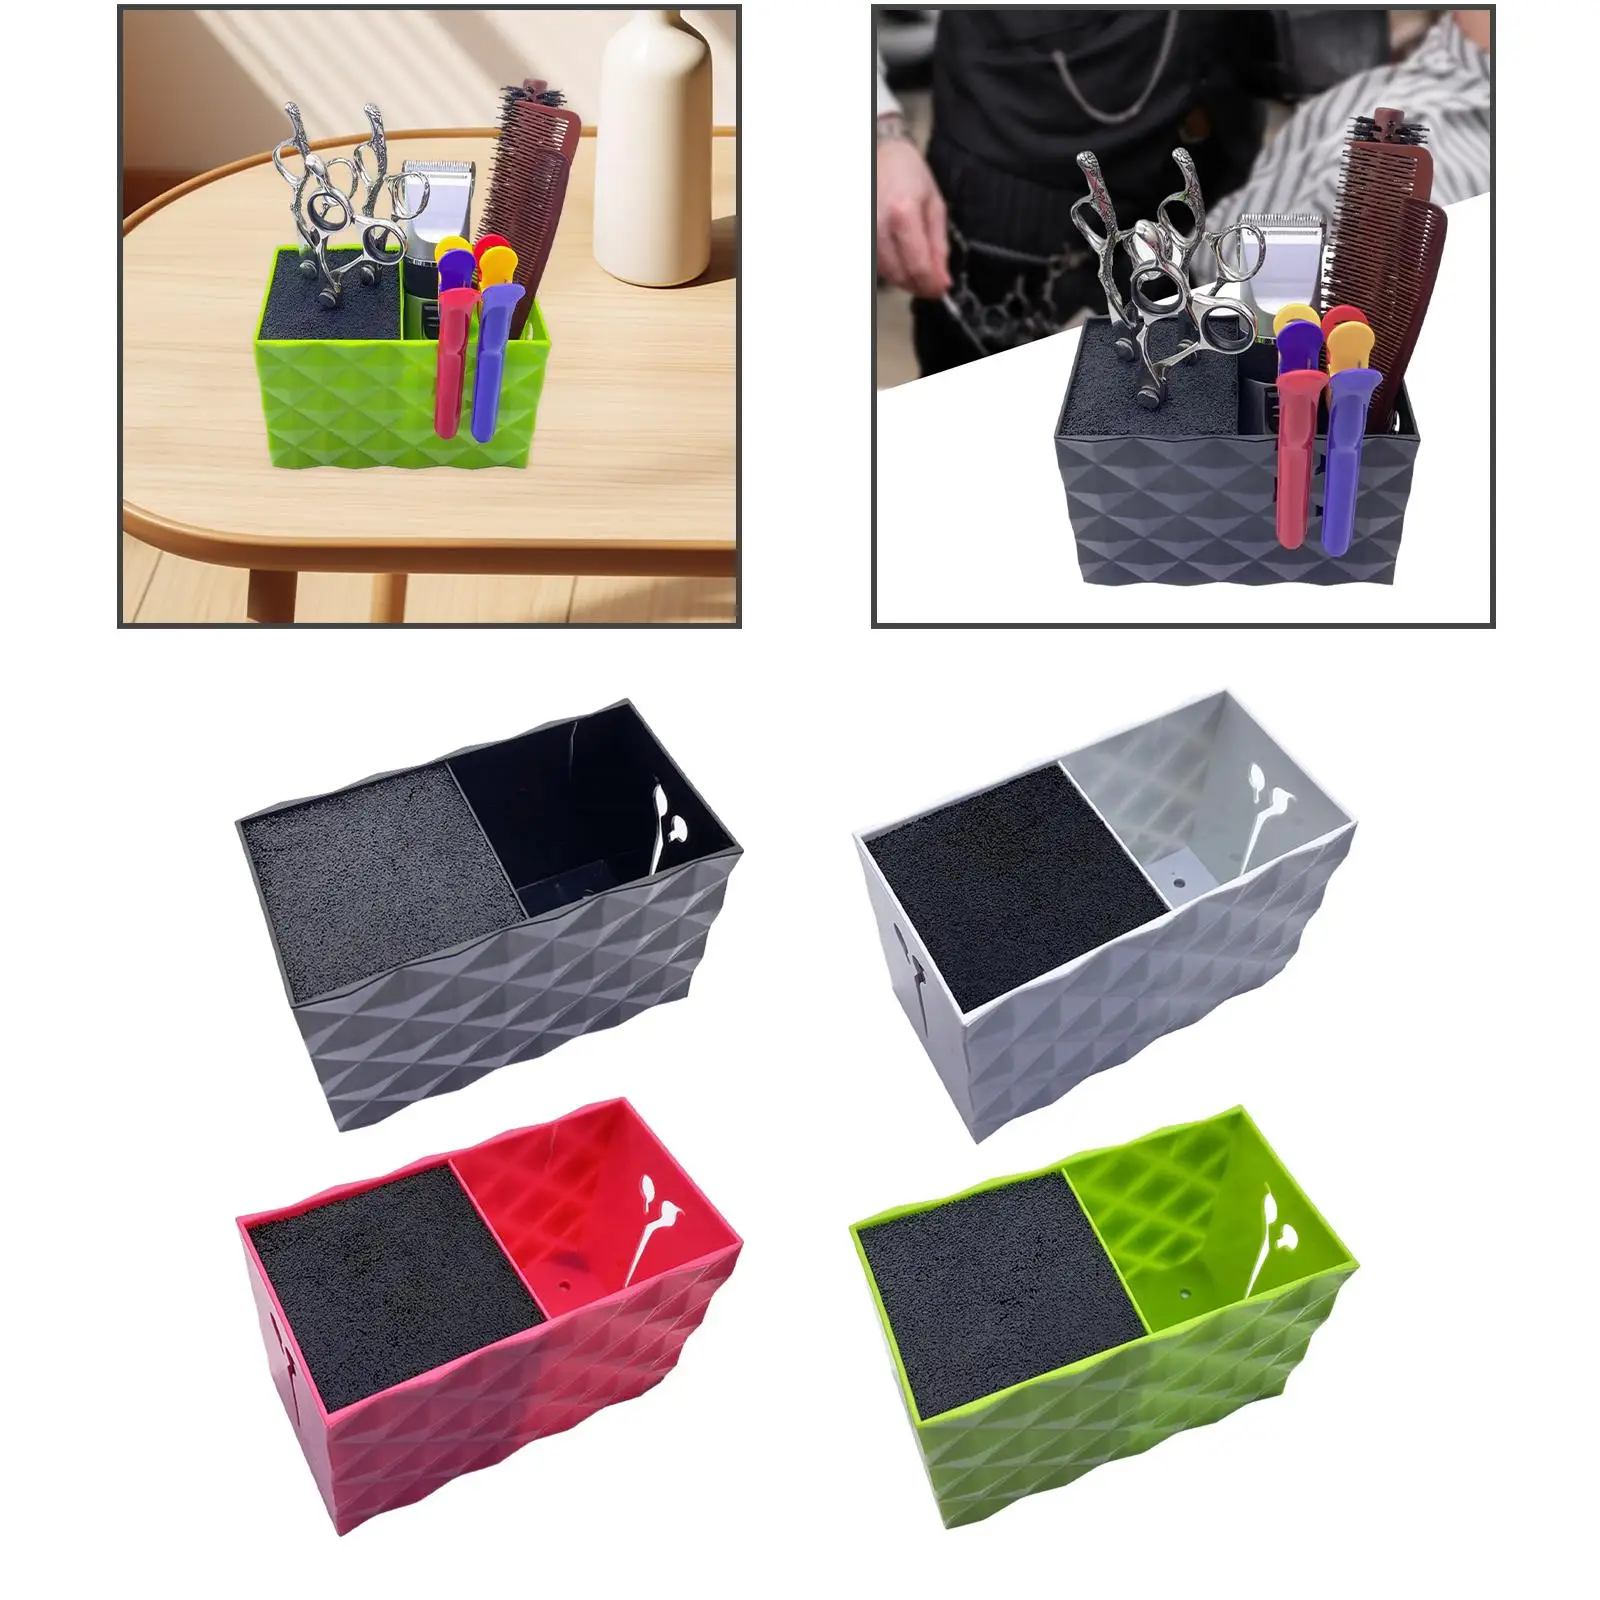 Professional Large Capacity Hairdressing Storage Box Scissor Combs Clips Holder for Brushes Clips Combs Hairstyling Hair